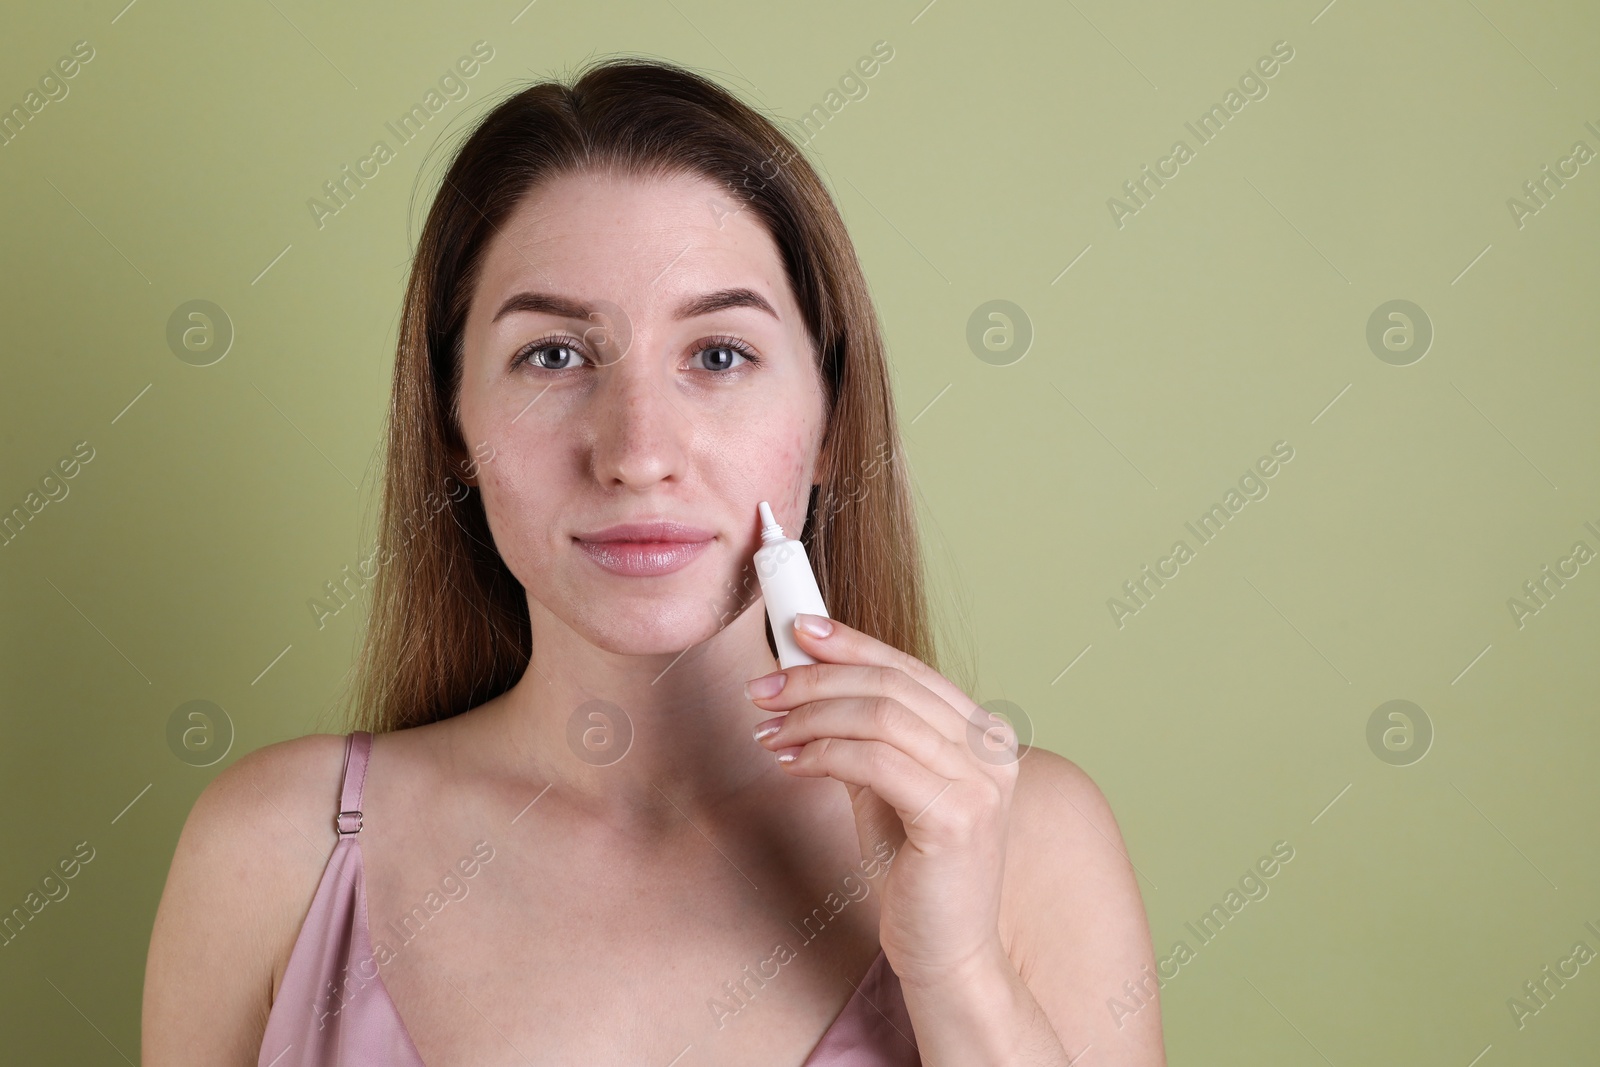 Photo of Young woman with acne problem applying cosmetic product onto her skin on olive background. Space for text